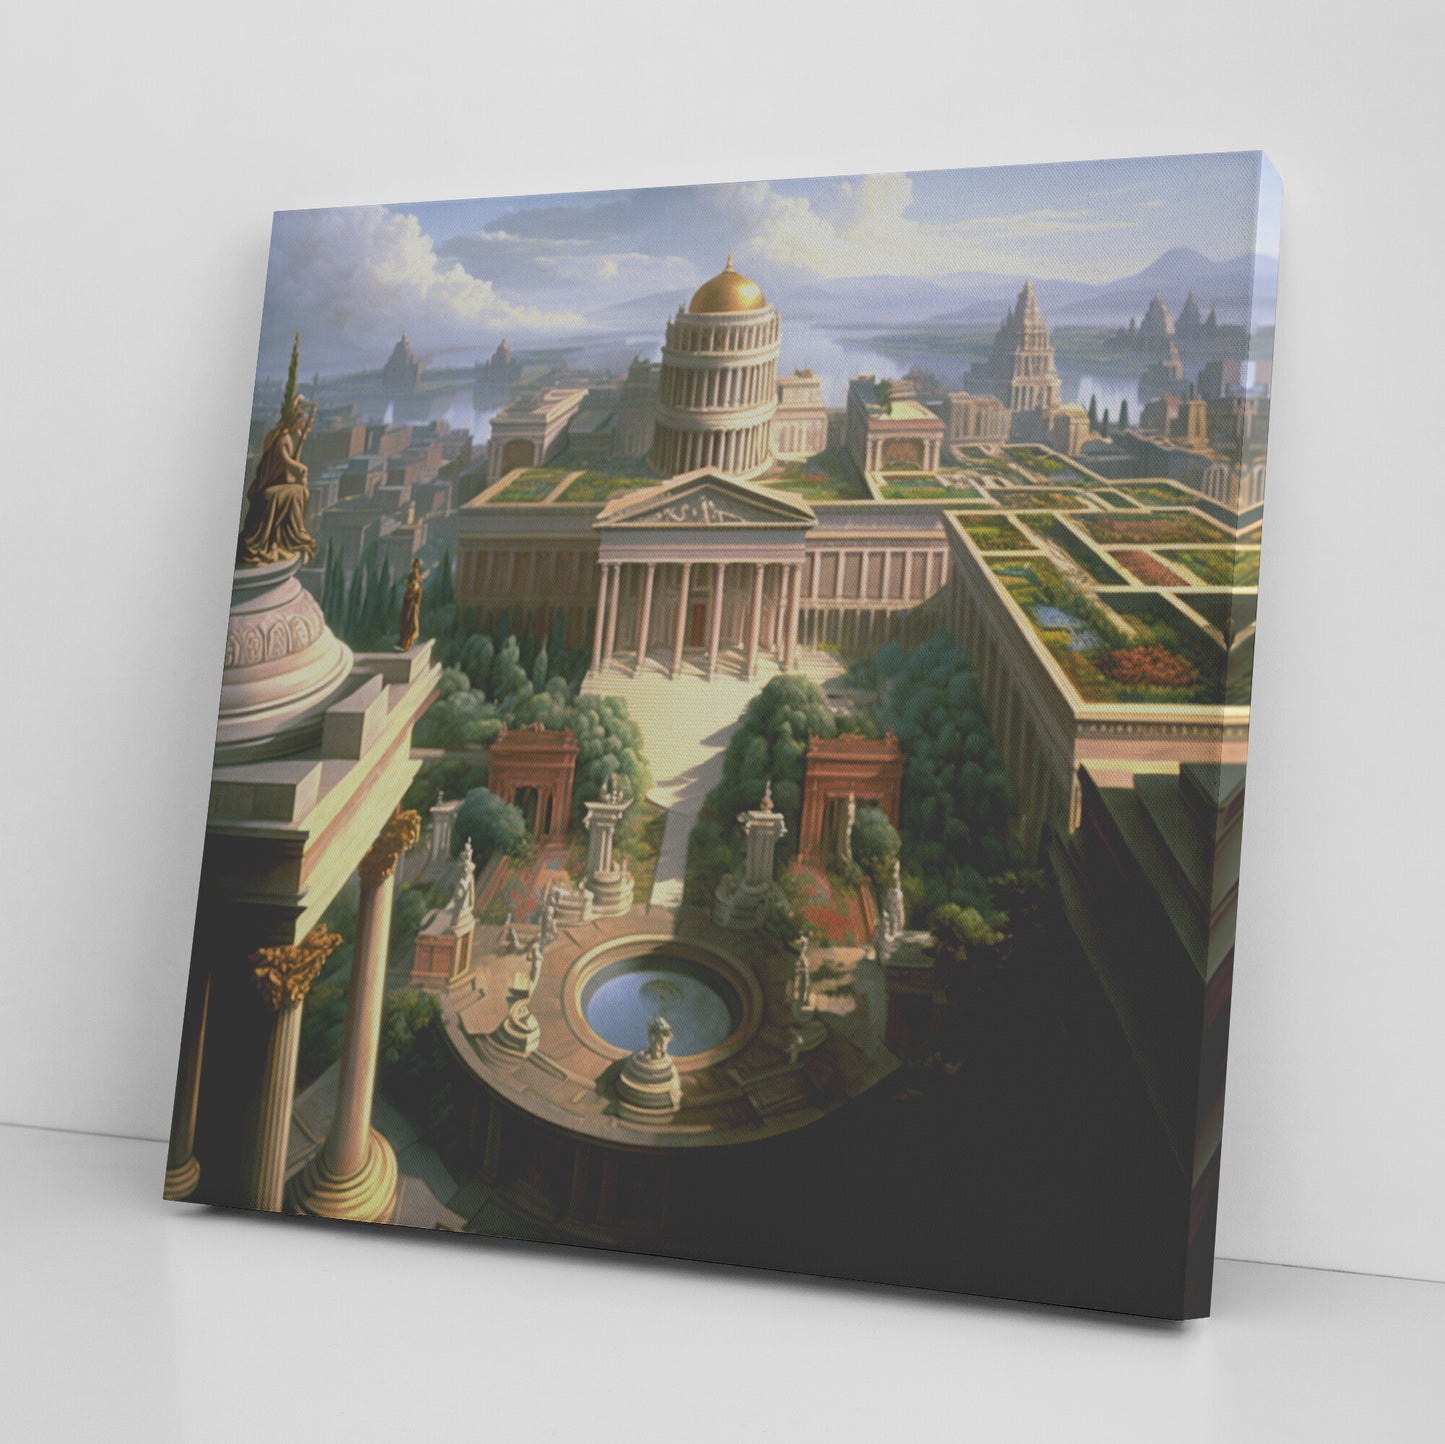 Palace Garden Landscape, Classical Garden and Statue Oil Painting, Midjourney AI Art